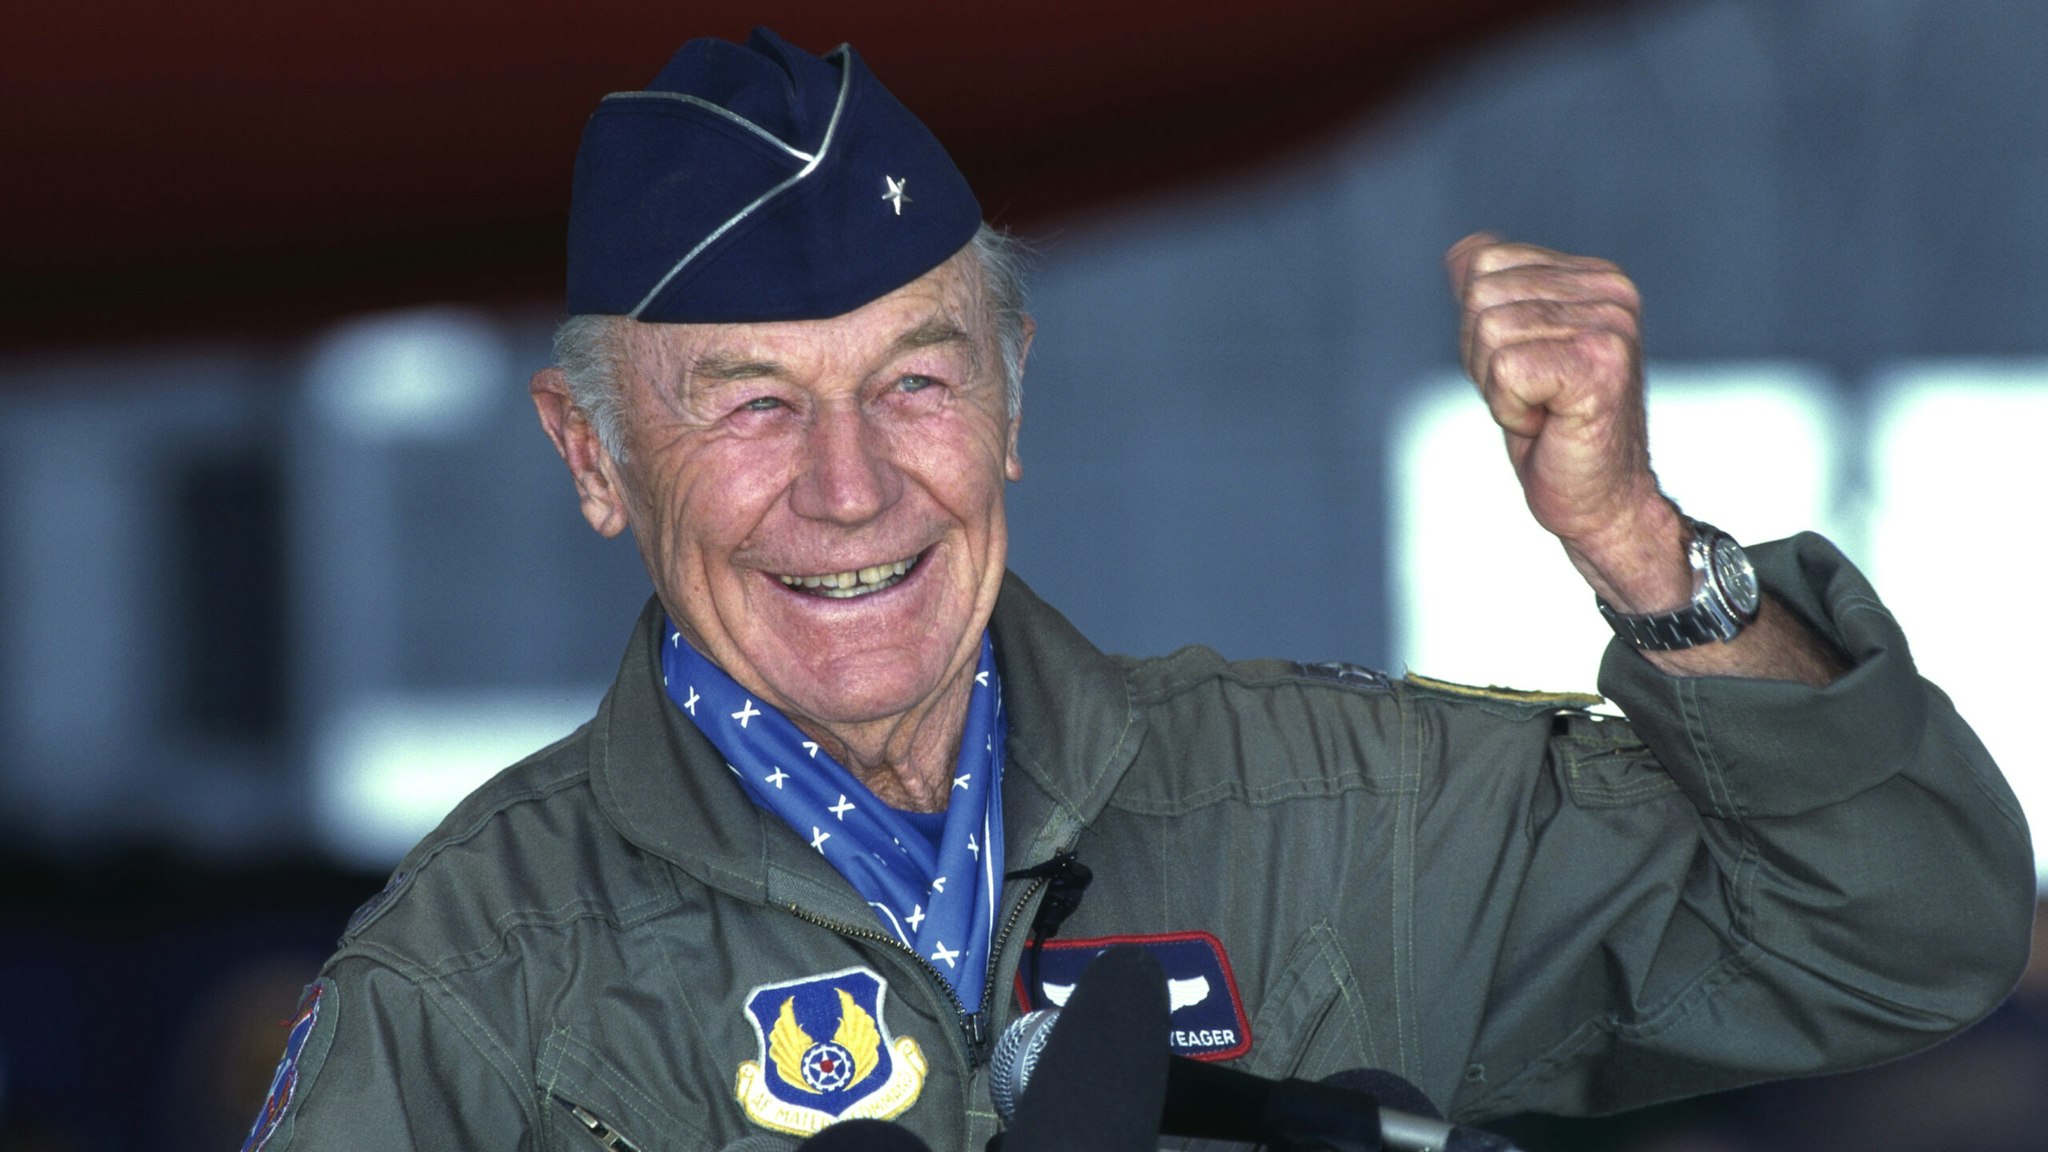 Chuck Yeager during a press conference at Edwards Air Force Base during the 50th anniversary celebration of his October 14, 1947 Bell X-1 flight, in which he became the first man to break the sound barrier. Yeager again flew at the speed of sound, only this time in a McDonnell Douglas F-15 Eagle.